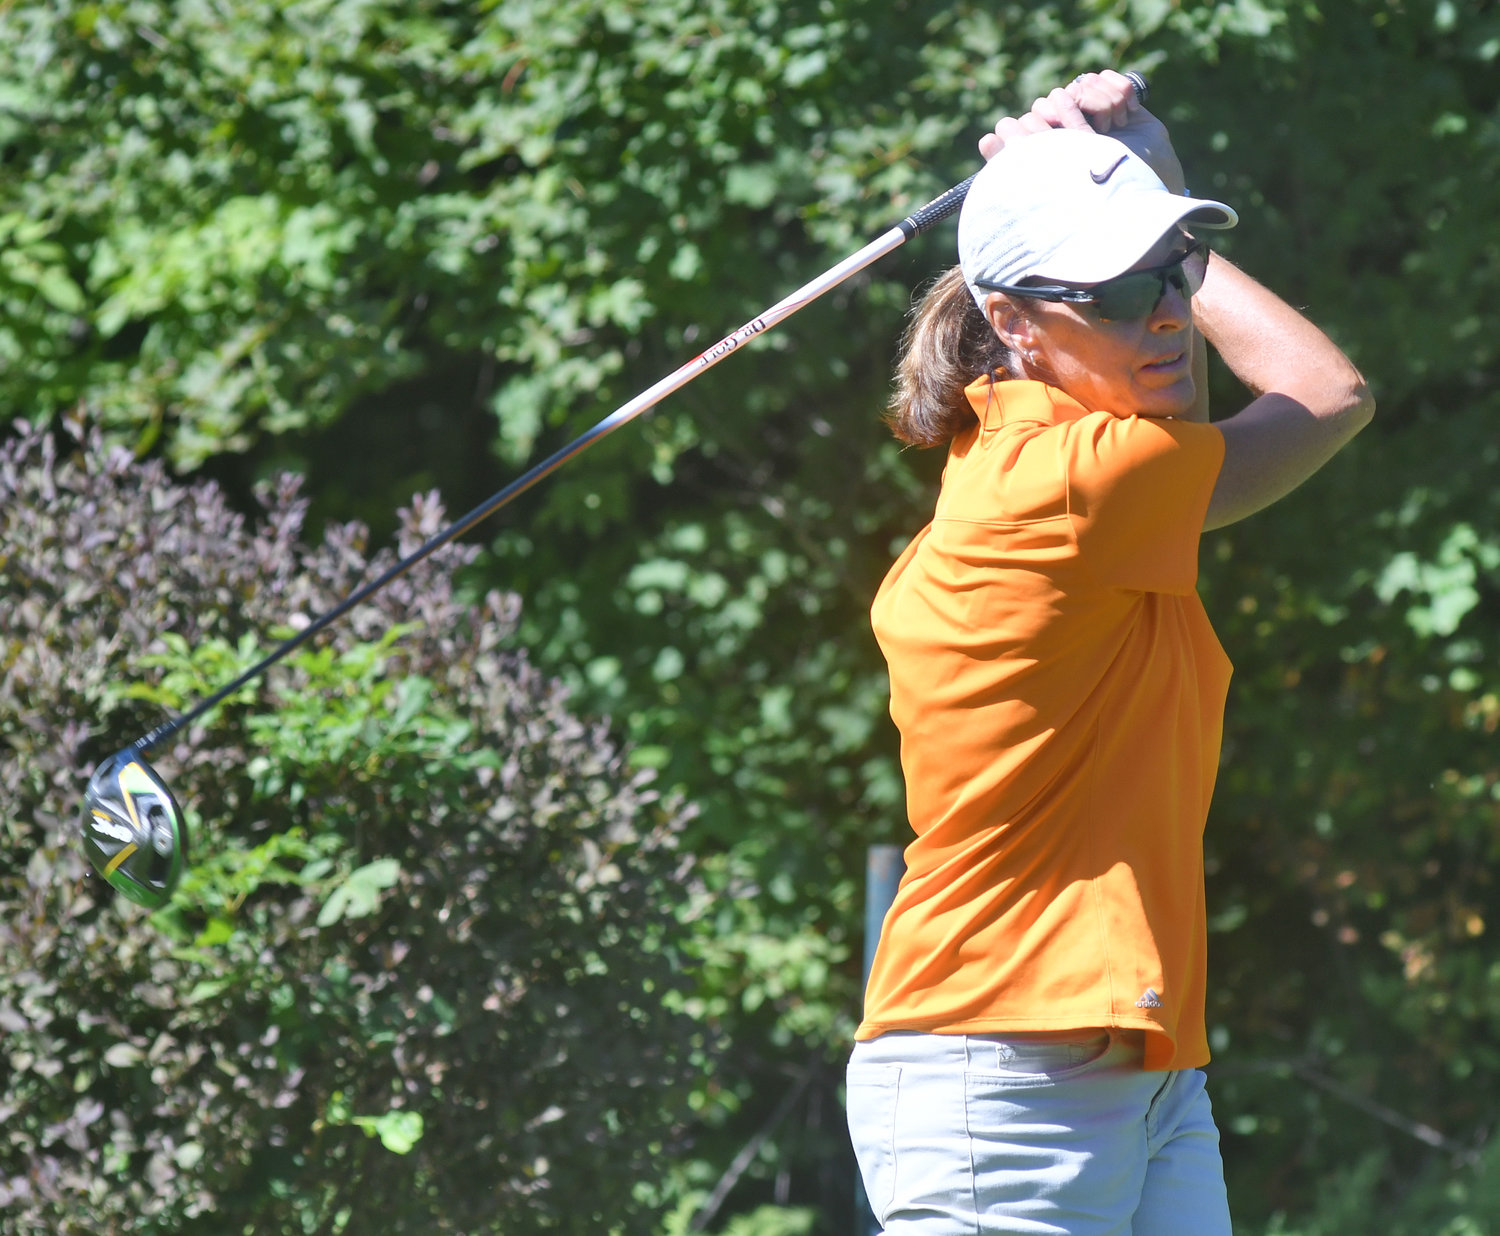 TEEING OFF — Teresa Cleland tees off on the ninth hole at Rome Country Club on Monday morning during the Rome City Women’s Amateur Golf Tournament. Cleland shot a 77 for the tournament.